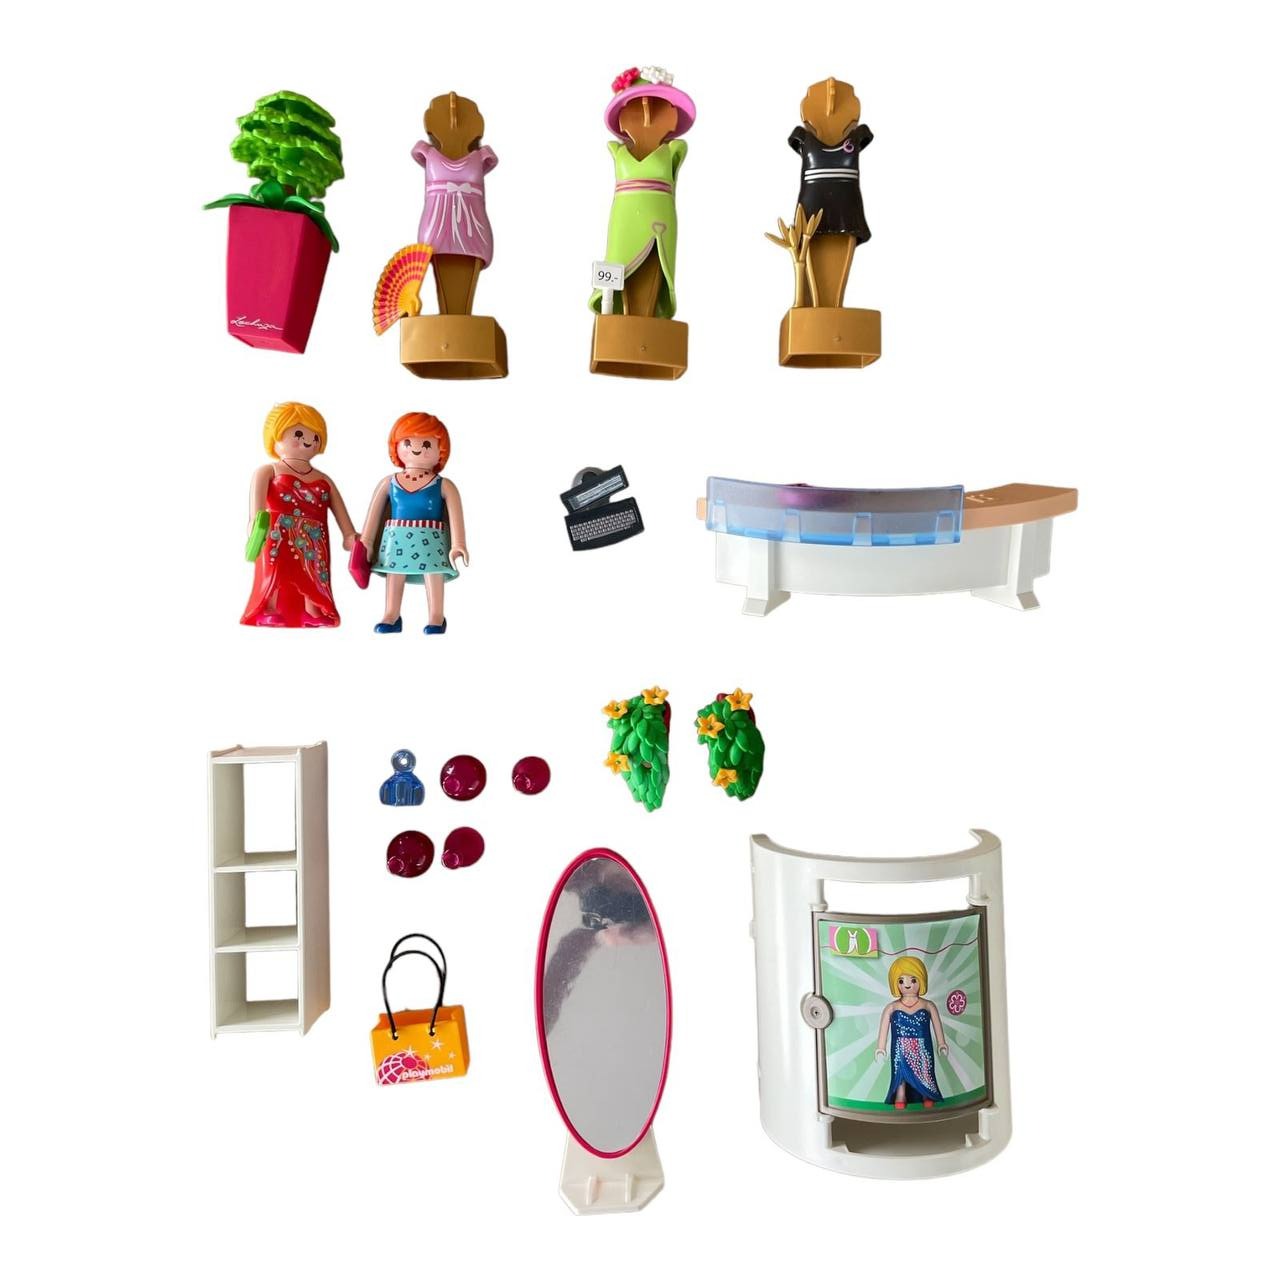 Playmobil ® Clothing Boutique 5486